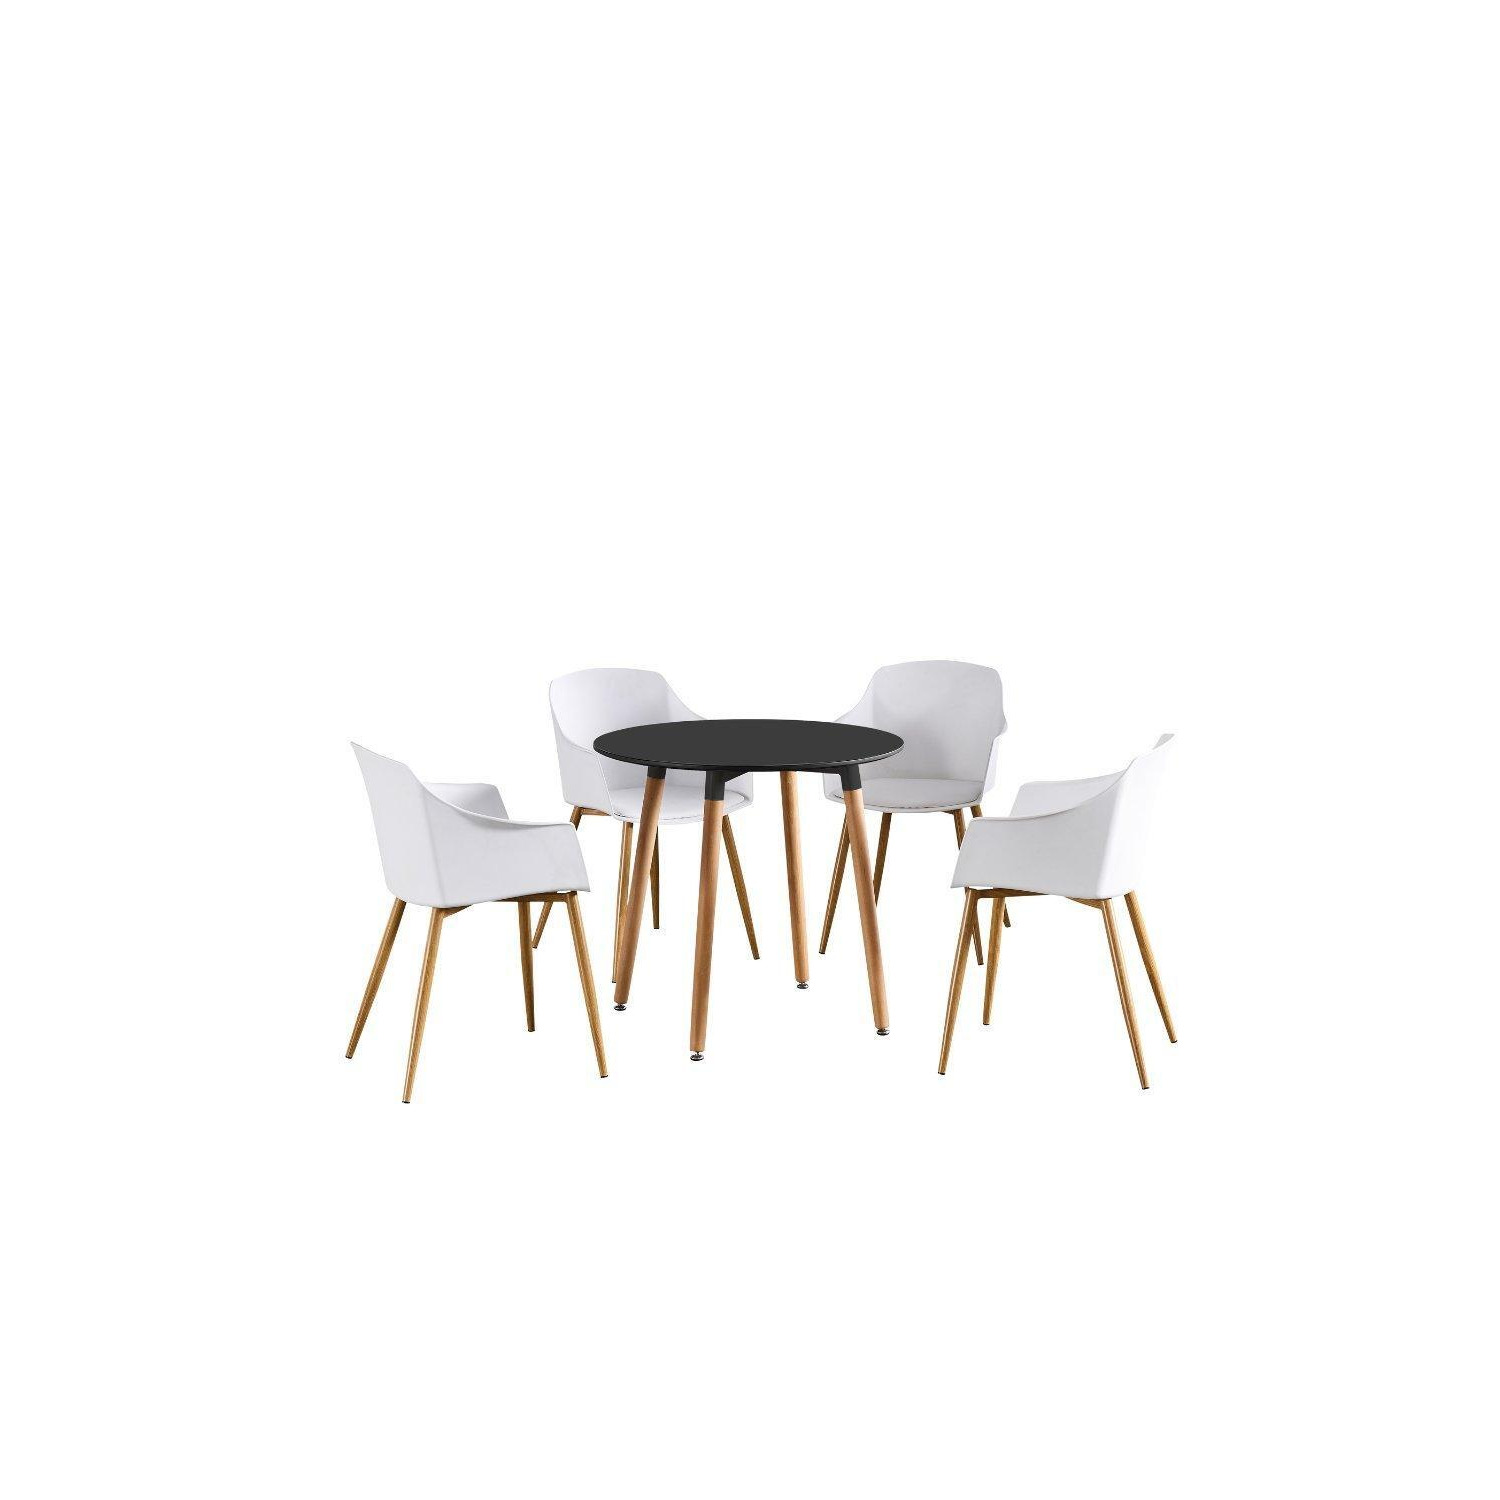 'Eden' Round Dining Set Includes a Dining Table & 4 Fabric Dining Chairs - image 1